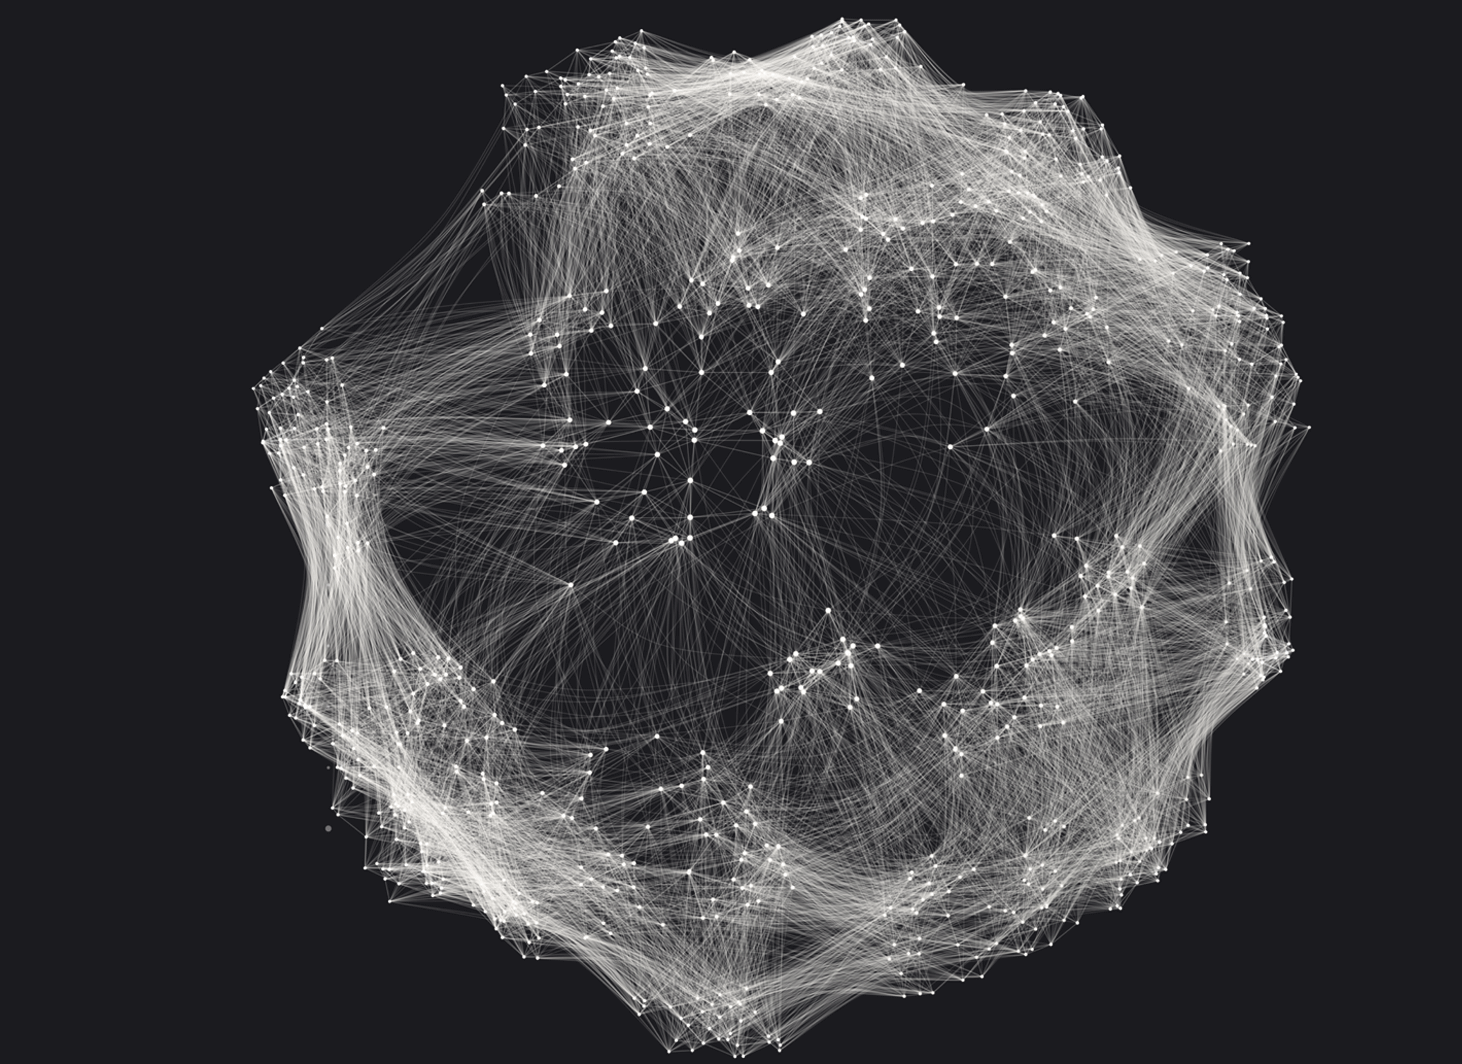 Untangling Microservices, or Balancing Complexity in Distributed Systems